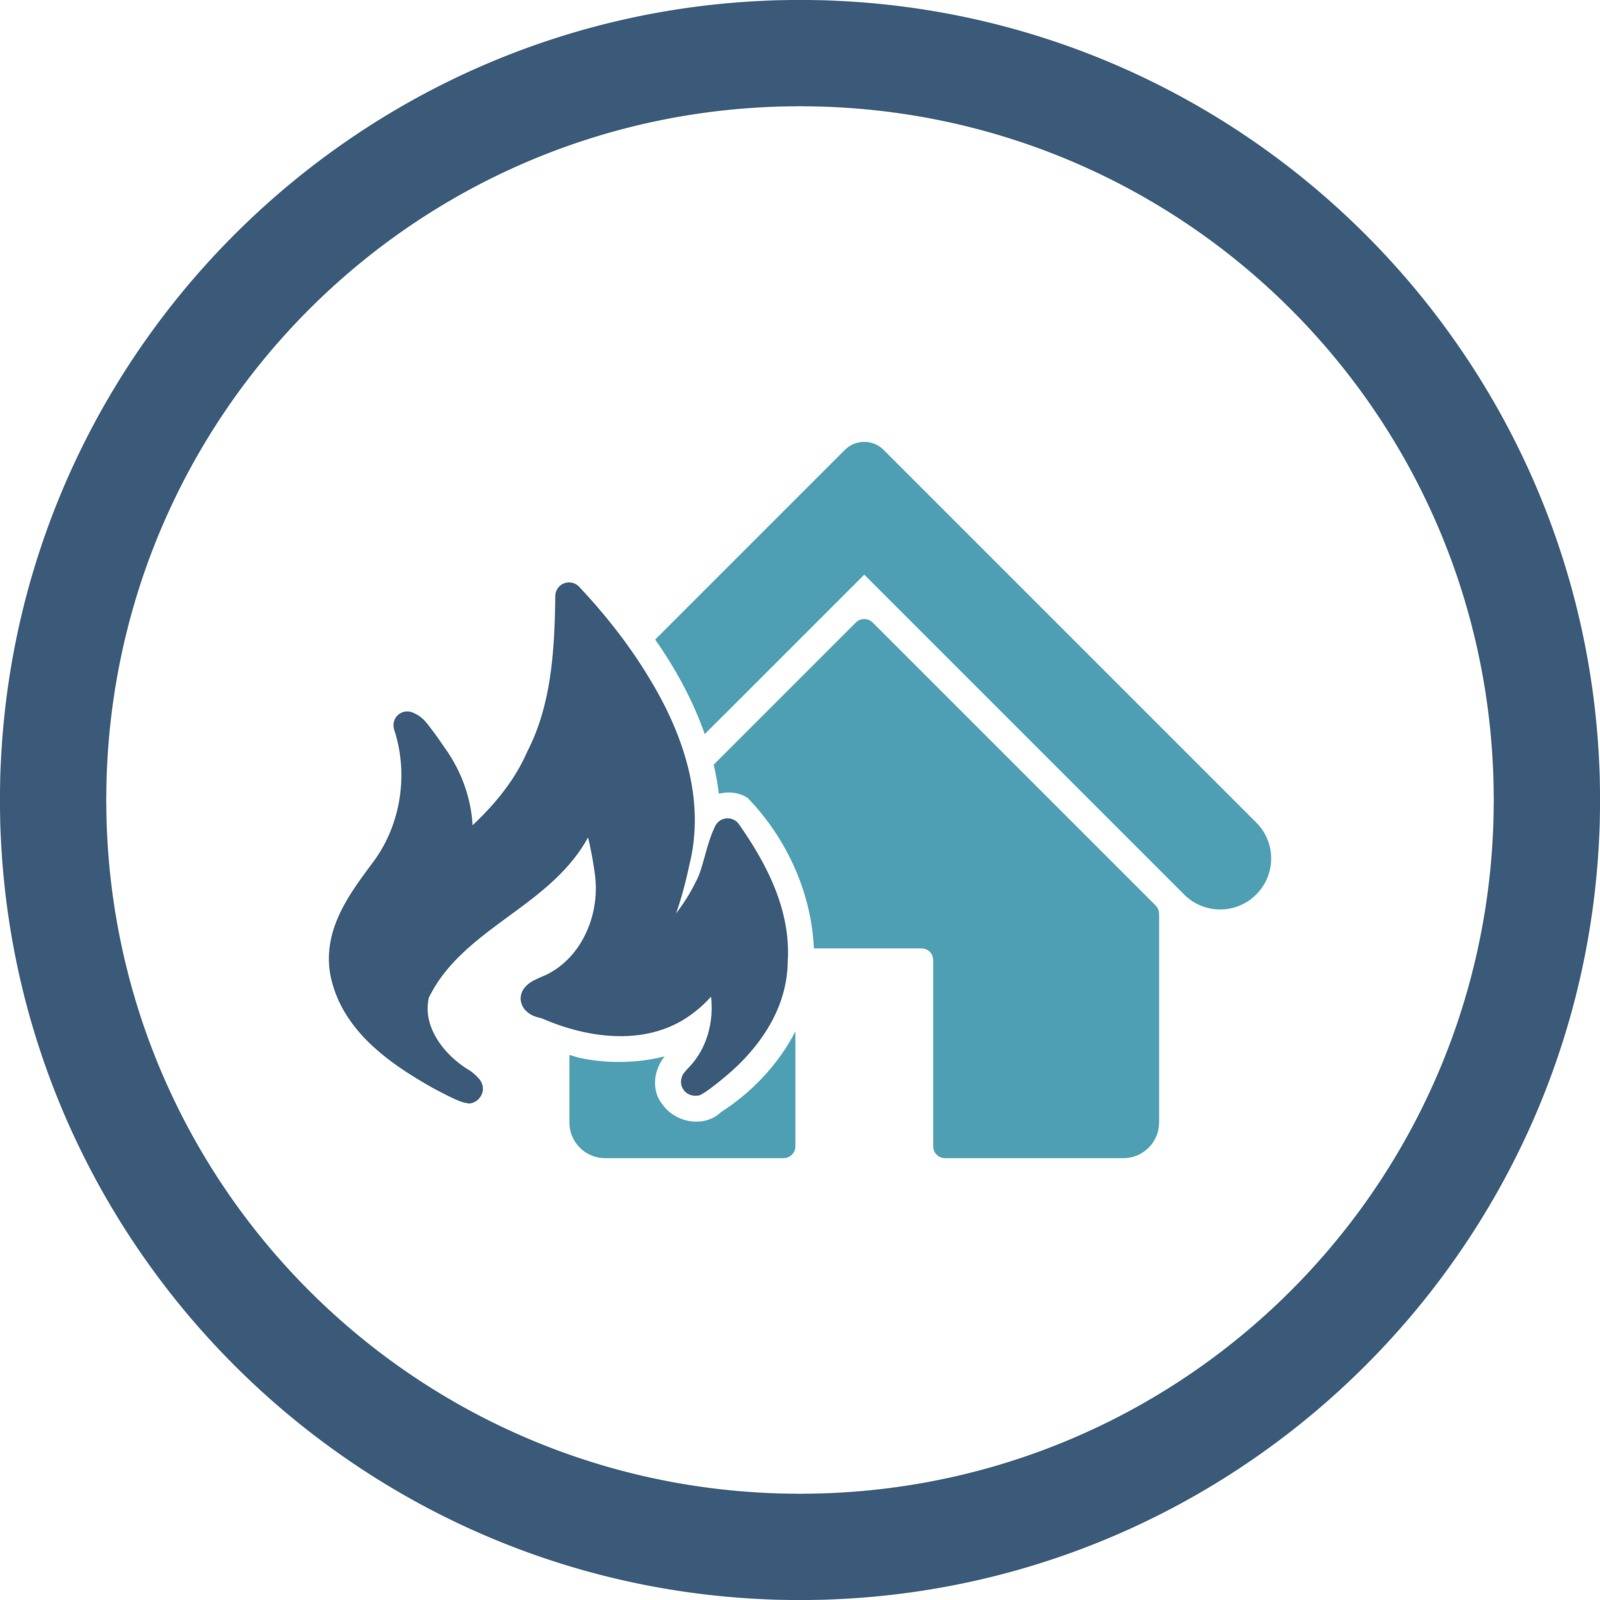 Fire Damage vector icon. This flat rounded symbol uses cyan and blue colors and isolated on a white background.